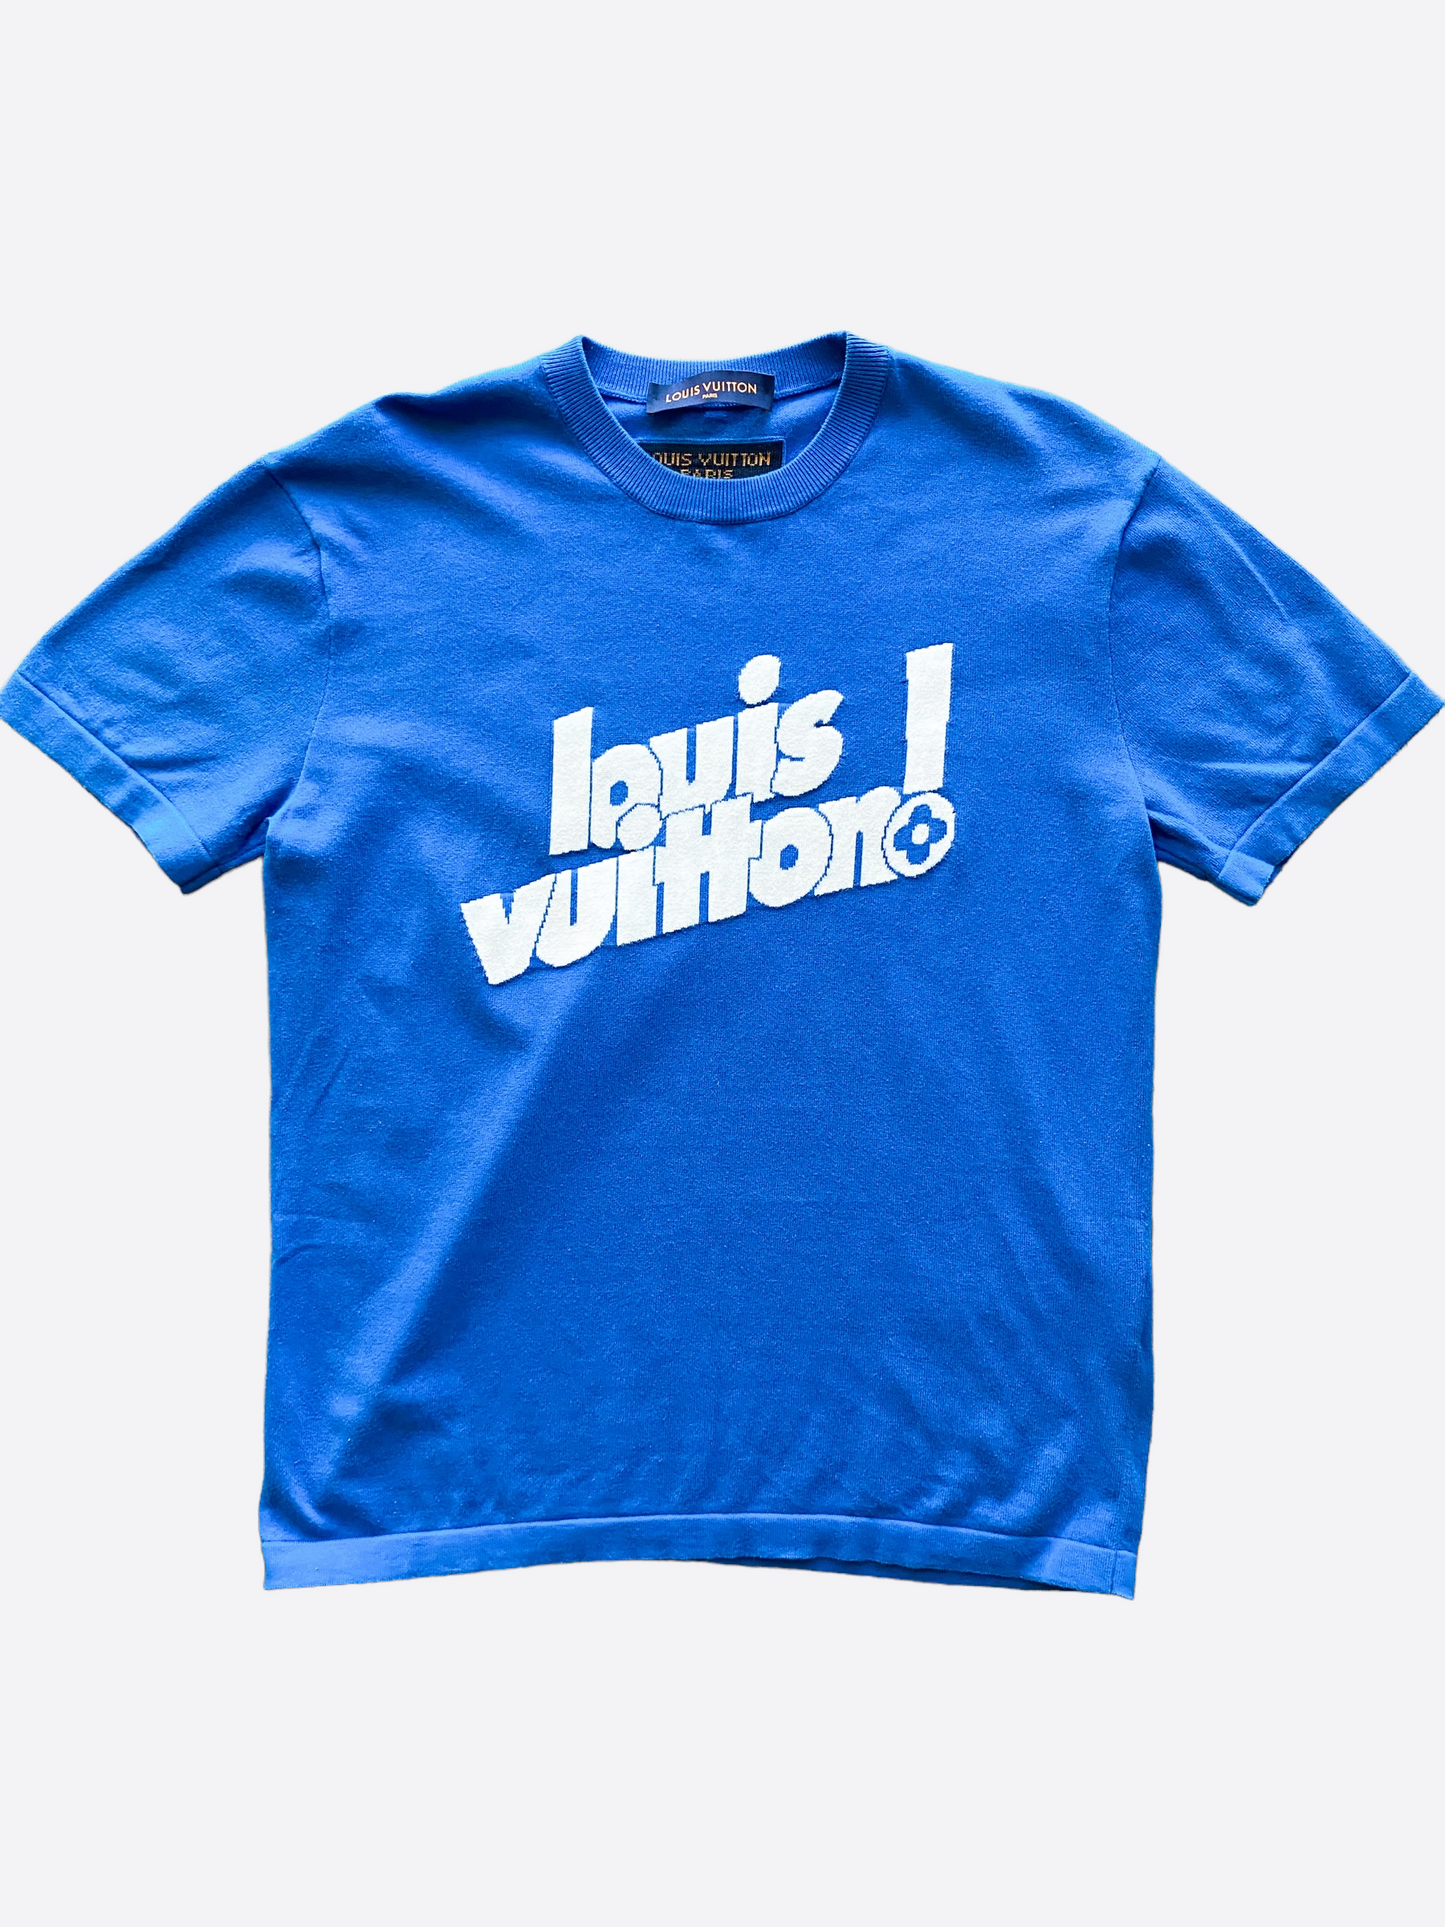 Louis Vuitton Everyday LV Logo T-Shirt Blue Large for Sale in